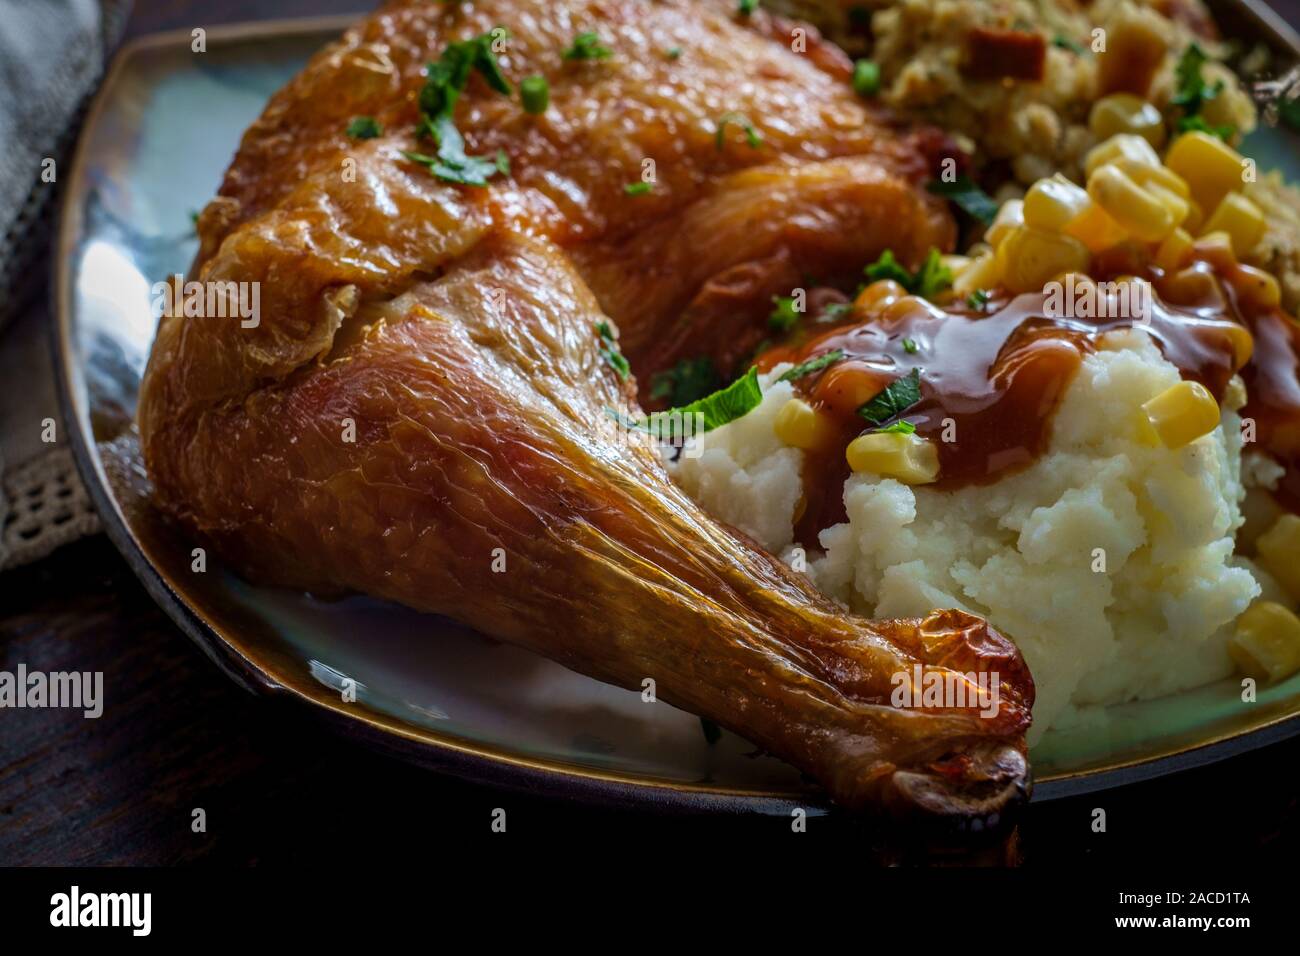 Traditional American Thanksgiving Dinner Plate With Crispy Baked Turkey Leg Mashed Potatoes Stuffing Gravy And Corn Stock Photo Alamy